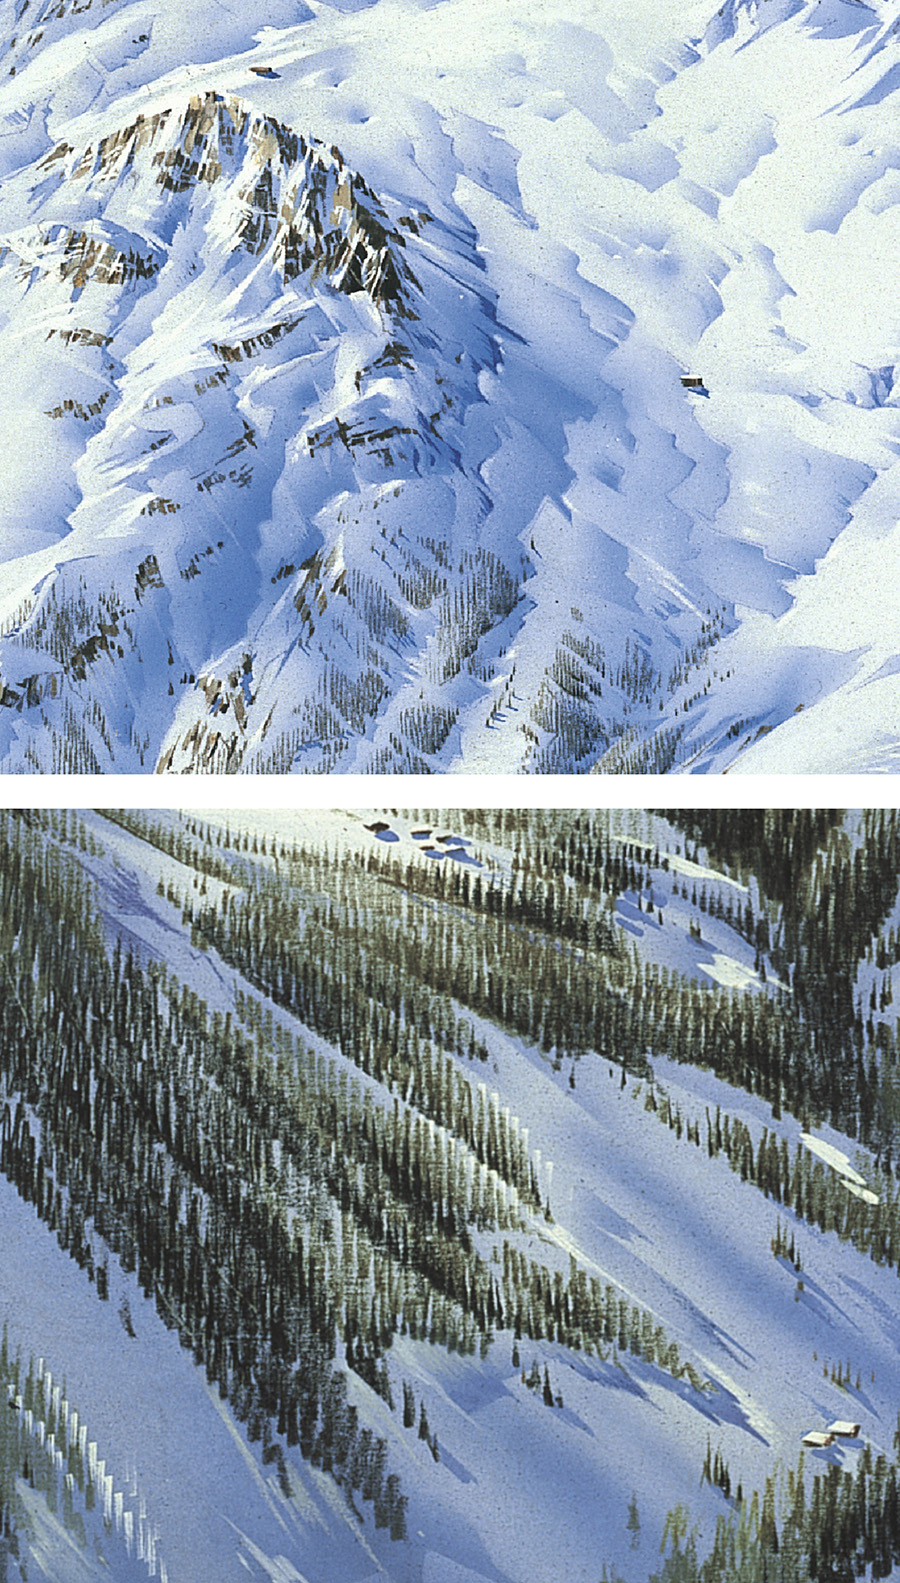 Figure 14. Novat used fine-scale cast shadows inside attached shadows of larger features. They improve the contrast of already shadowed areas, thus revealing masked terrain features. Close-ups of (top) Espace Killy, Pierre Novat, 1983 and (bottom) Courchevel, Pierre Novat, 1984.